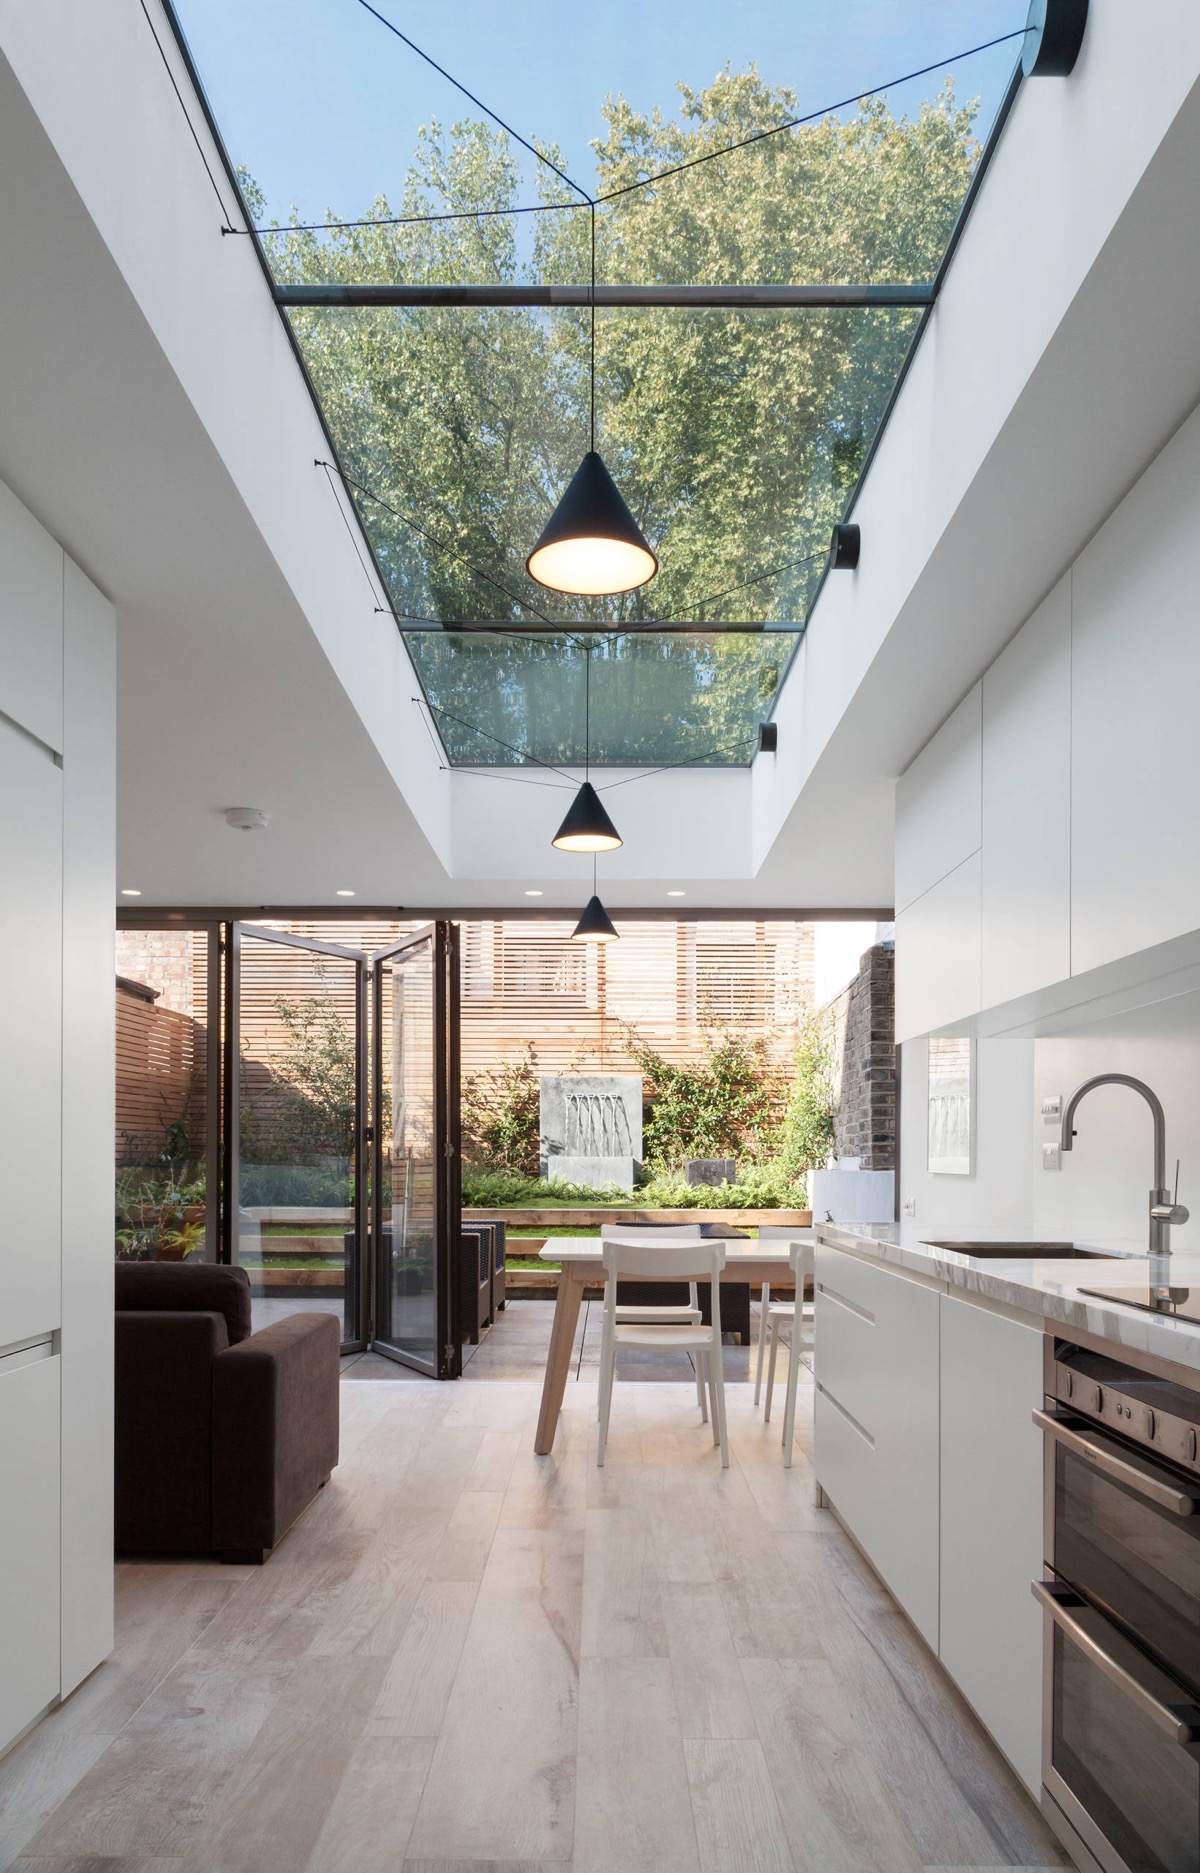 Houses With Skylights – Everything You Need to Know